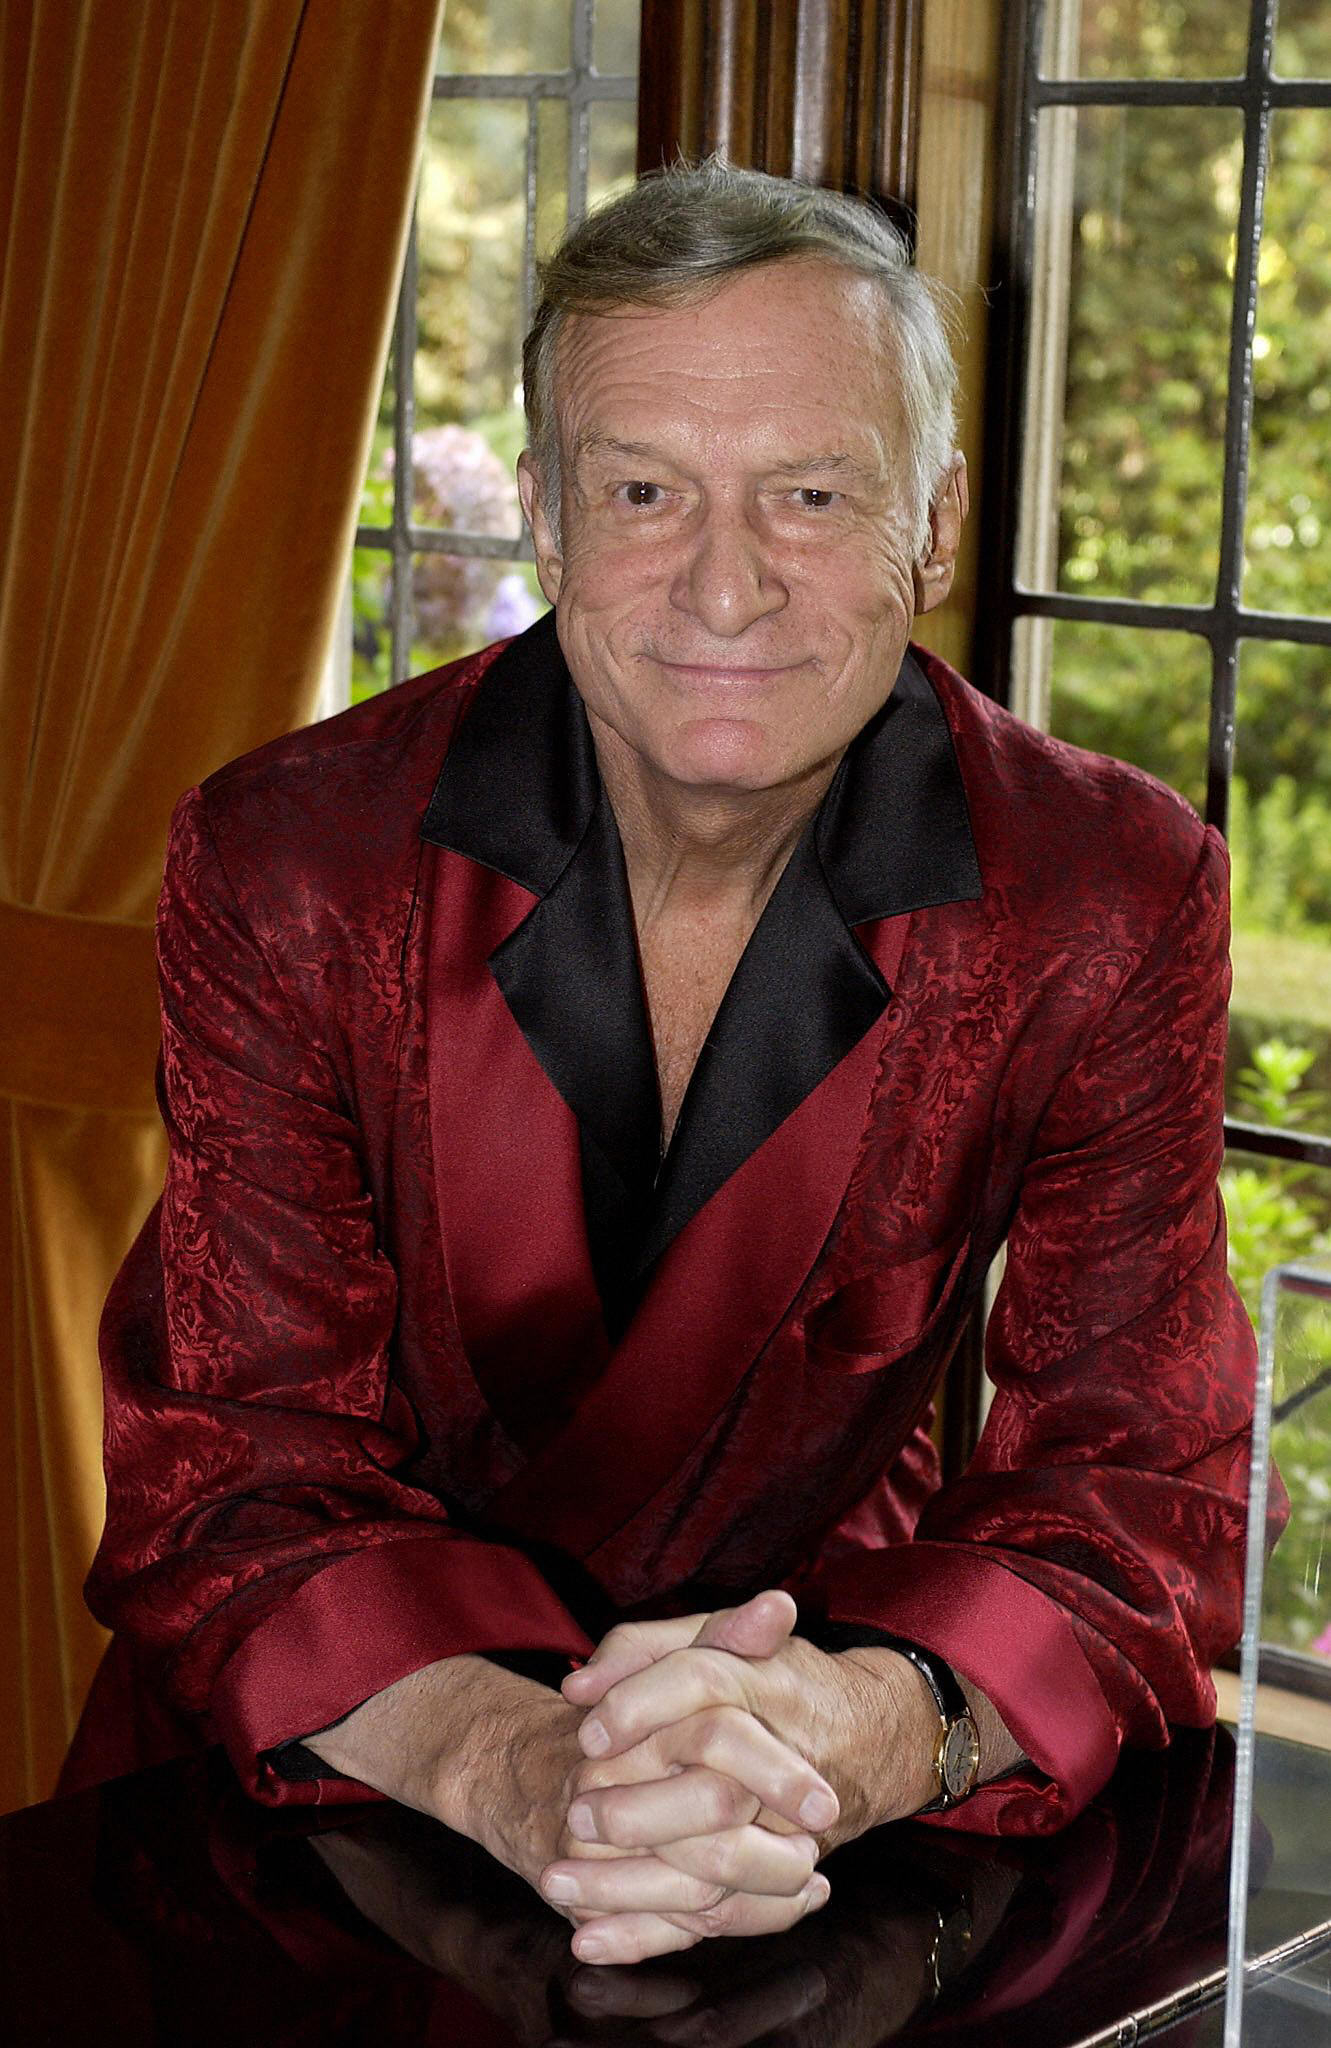 Hugh Hefner smiling for a photo while wearing his robe